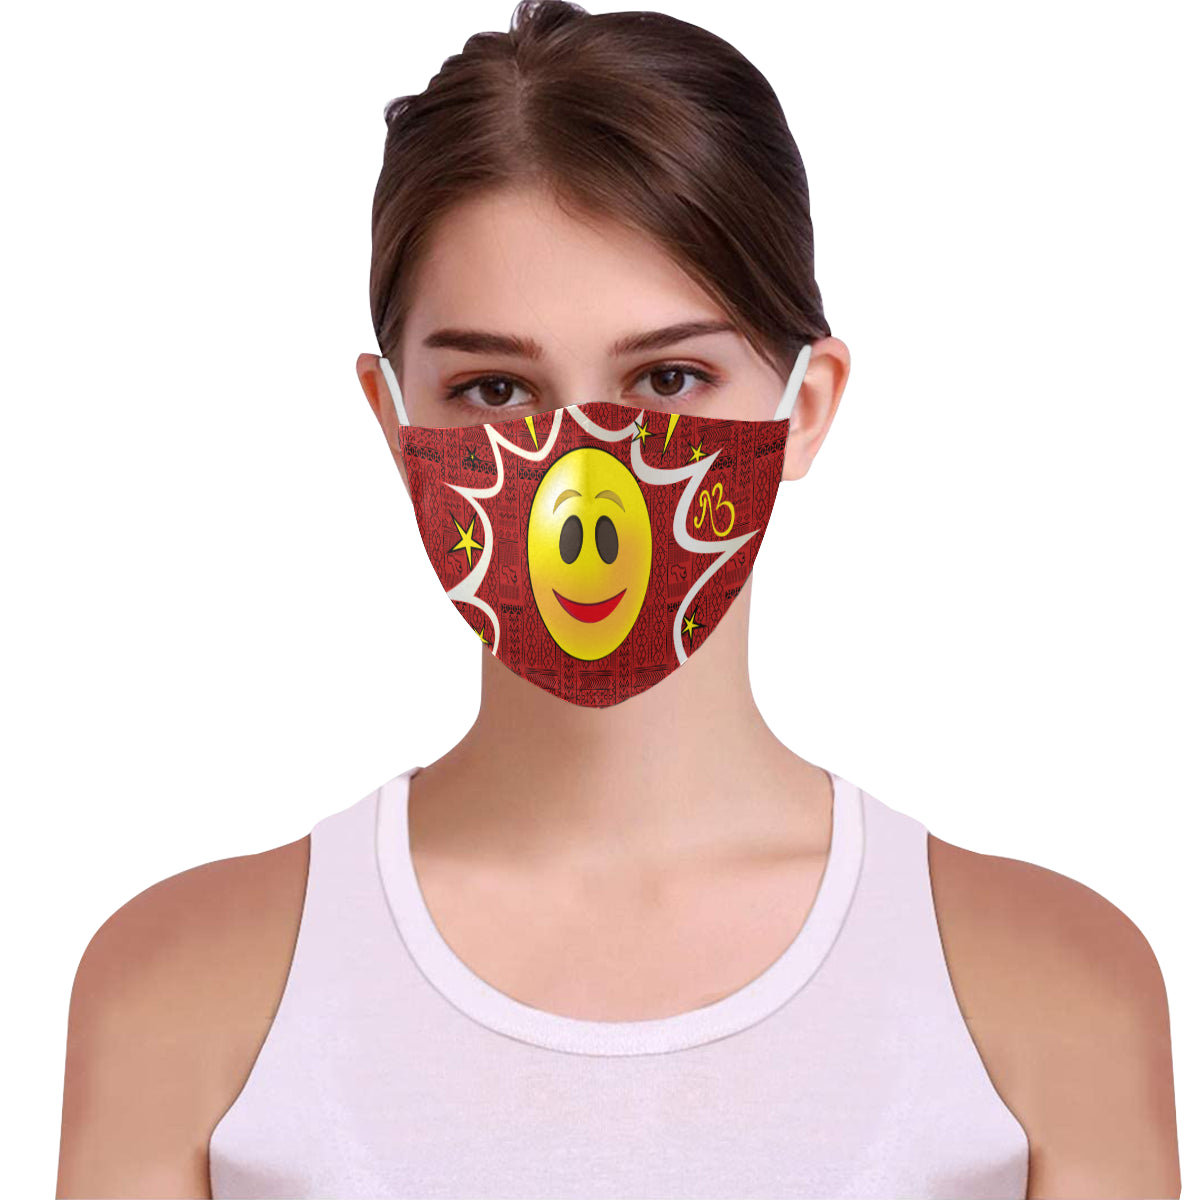 Classic Tribal Print Comic Emoji Cotton Fabric Face Mask with Filter Slot and Adjustable Strap - Non-medical use (2 Filters Included)